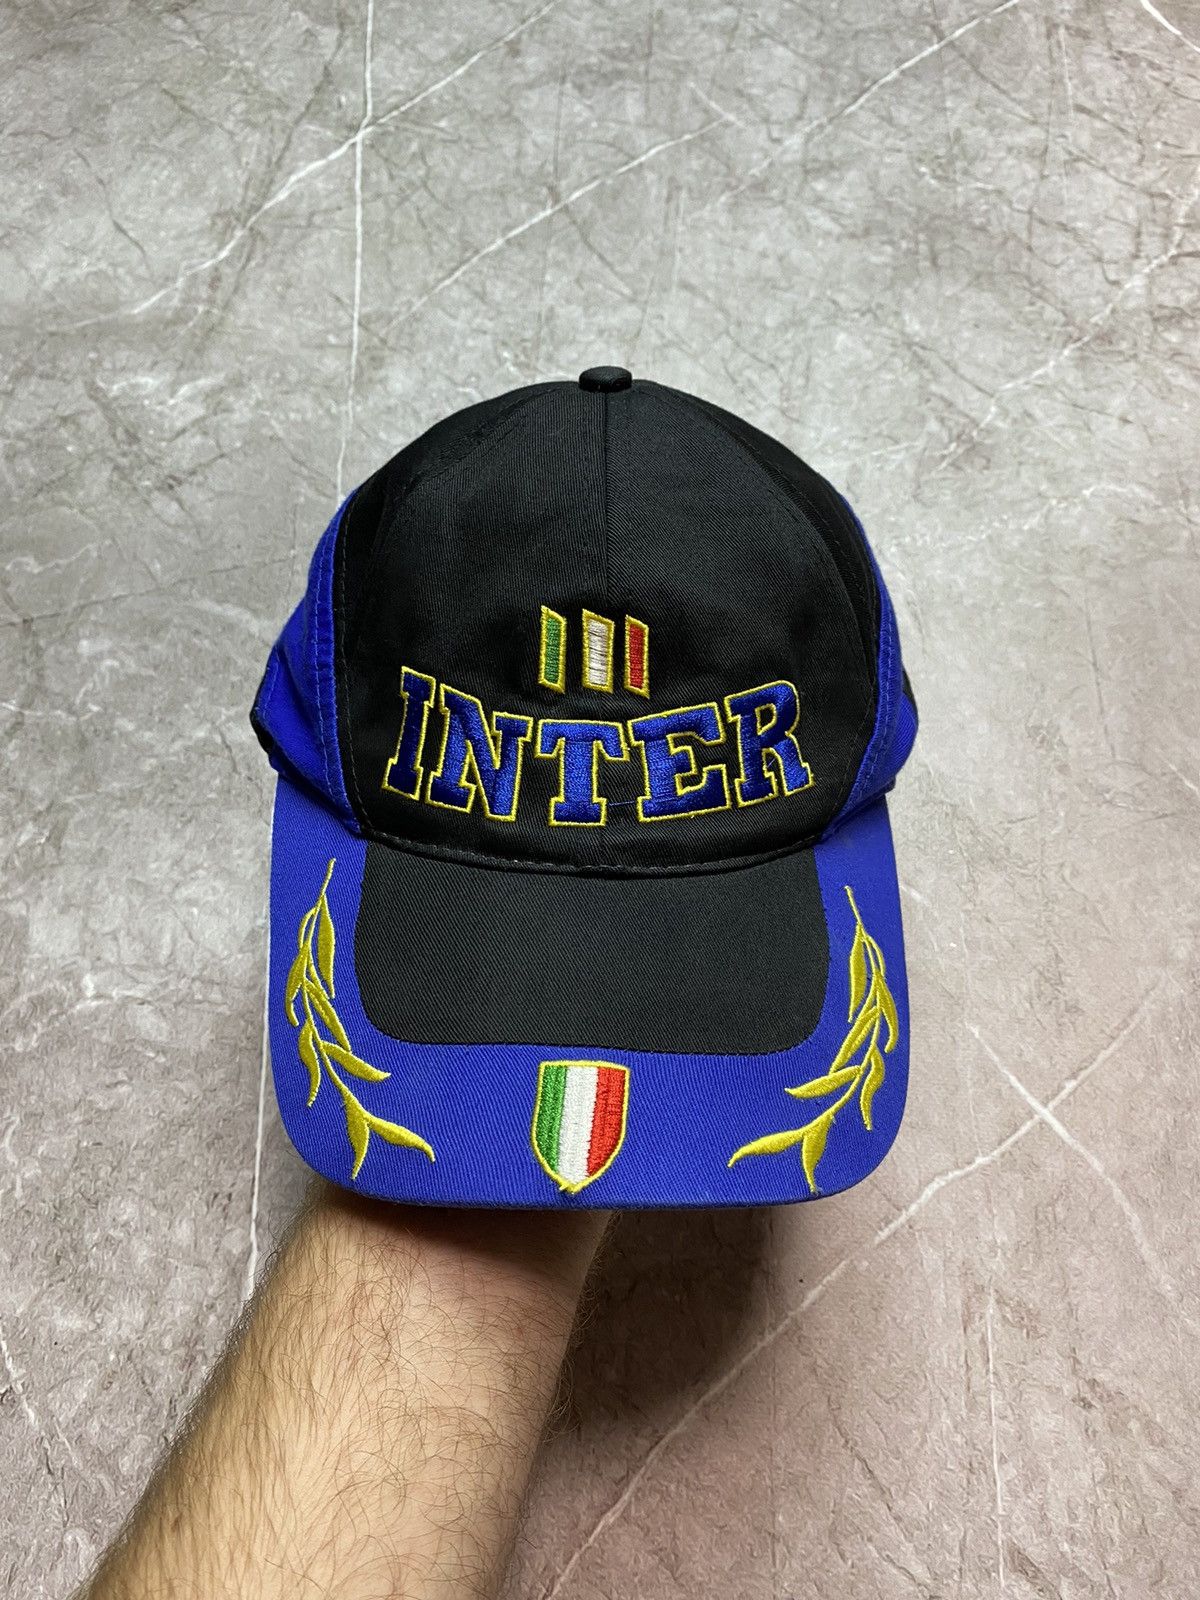 Pre-owned Soccer Jersey X Vintage Inter Milan Cap Hat Psg Newcastle Manchester In Black